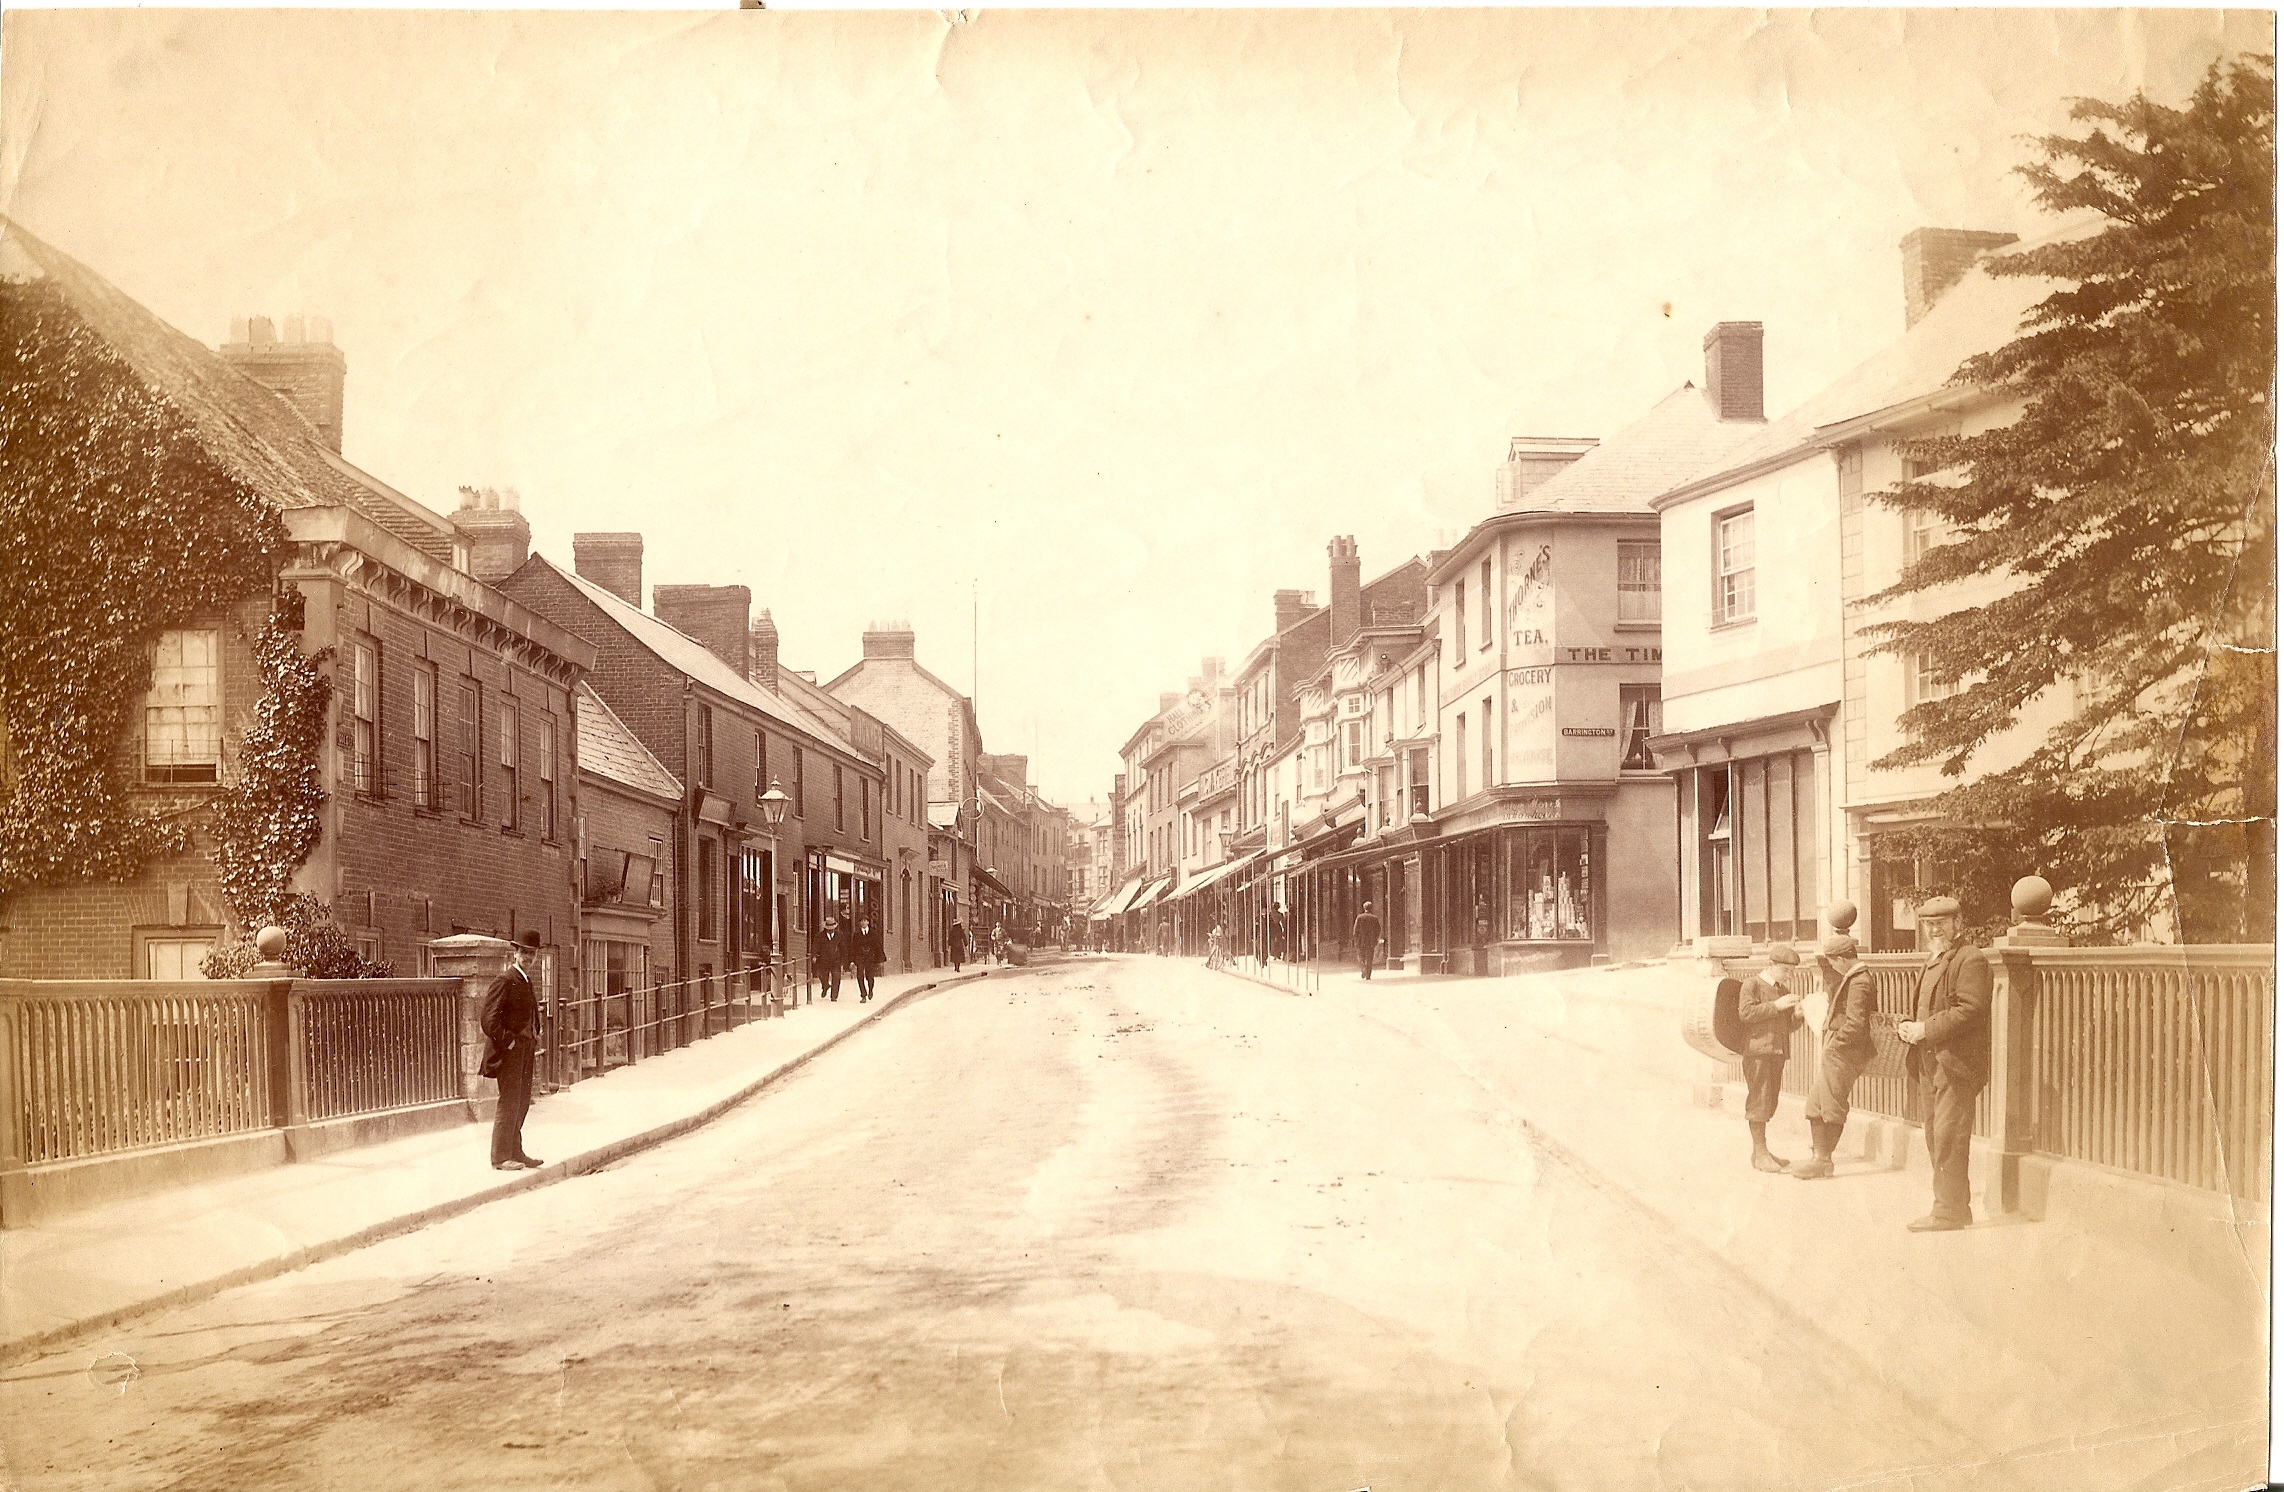 An old black and white photo with a sepia tint. It shows a view up Tiverton's Gold Street in around 1900, with a wide road and buildings either side. The building on the left has ivy climbing up the side and there is a big tree on the right of the image. There are several men standing around on either side of the street in Victorian dress; smart jackets and hats.